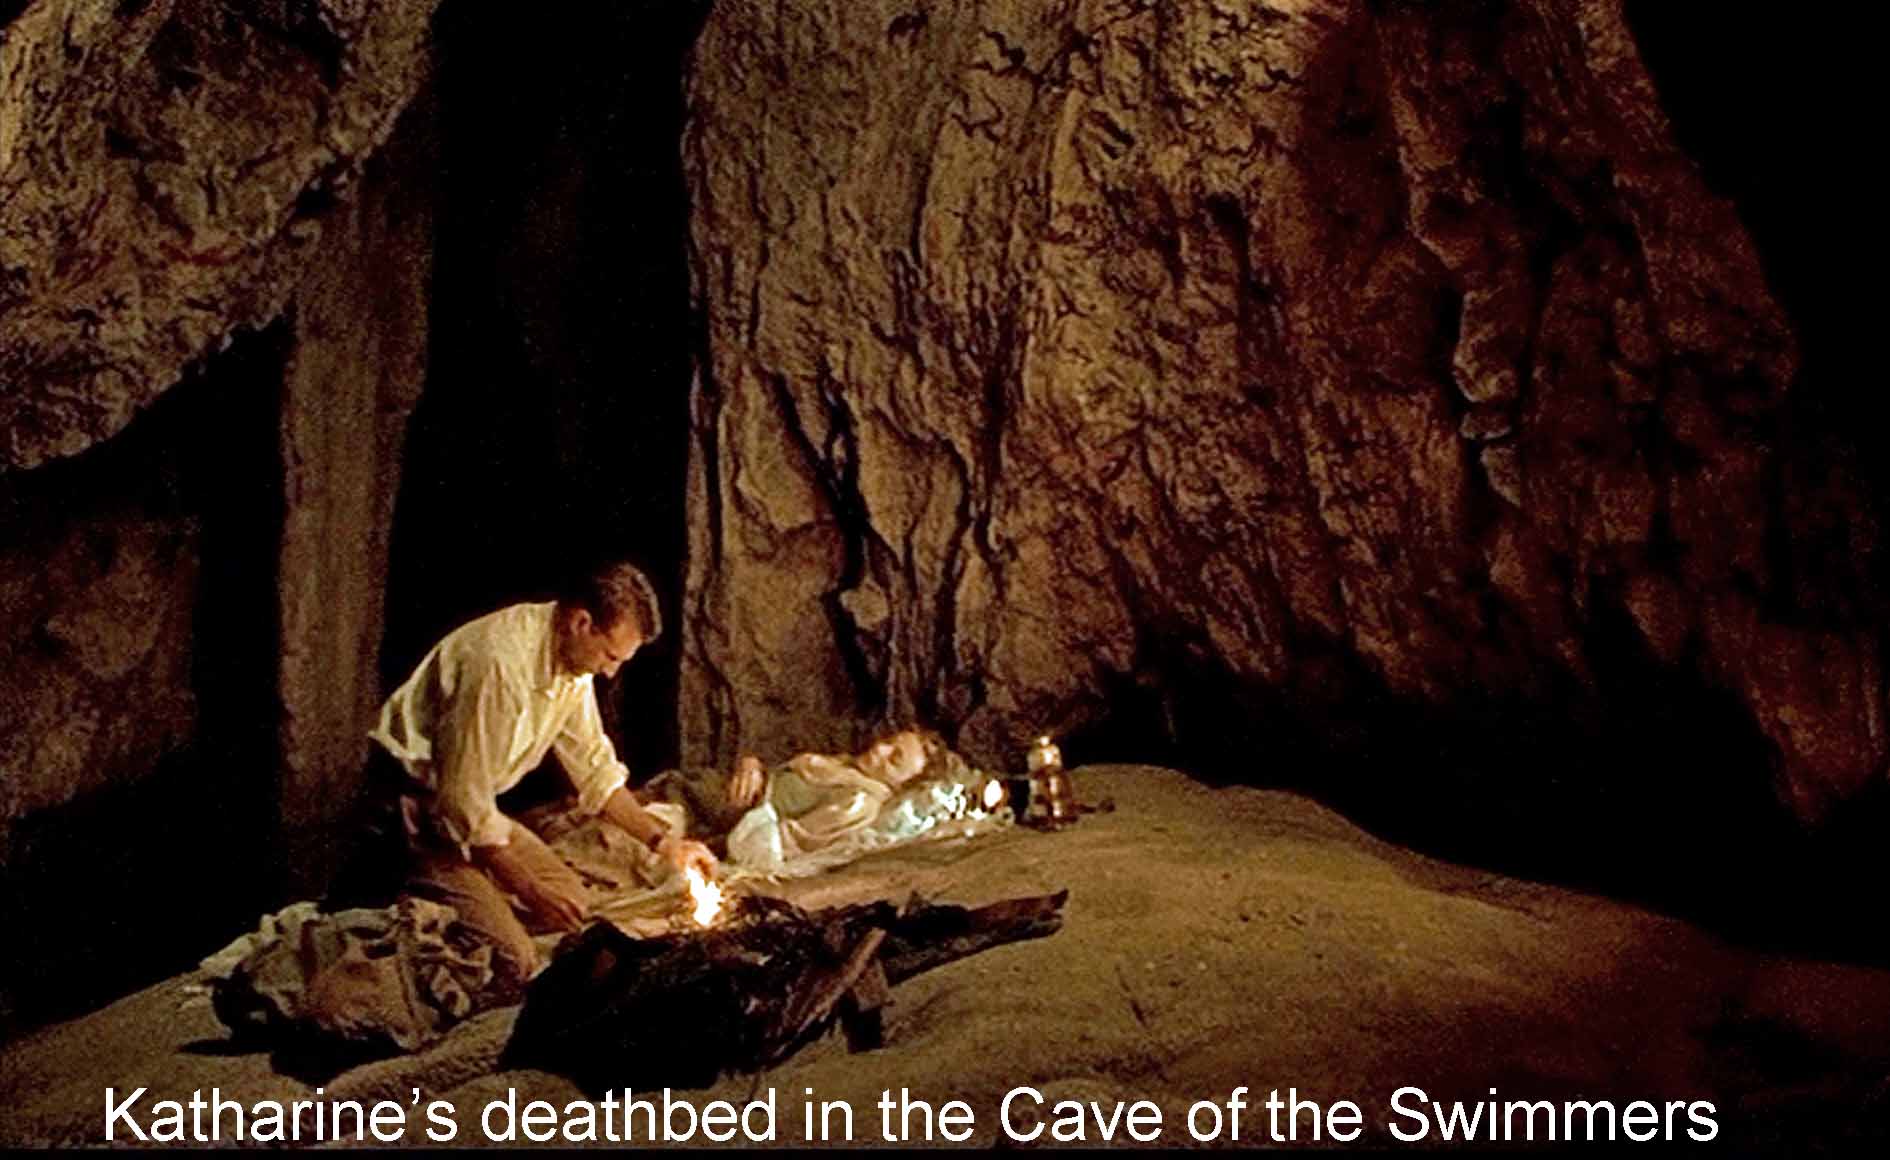 Katharine's deathbed in the Cave of the Swimmers